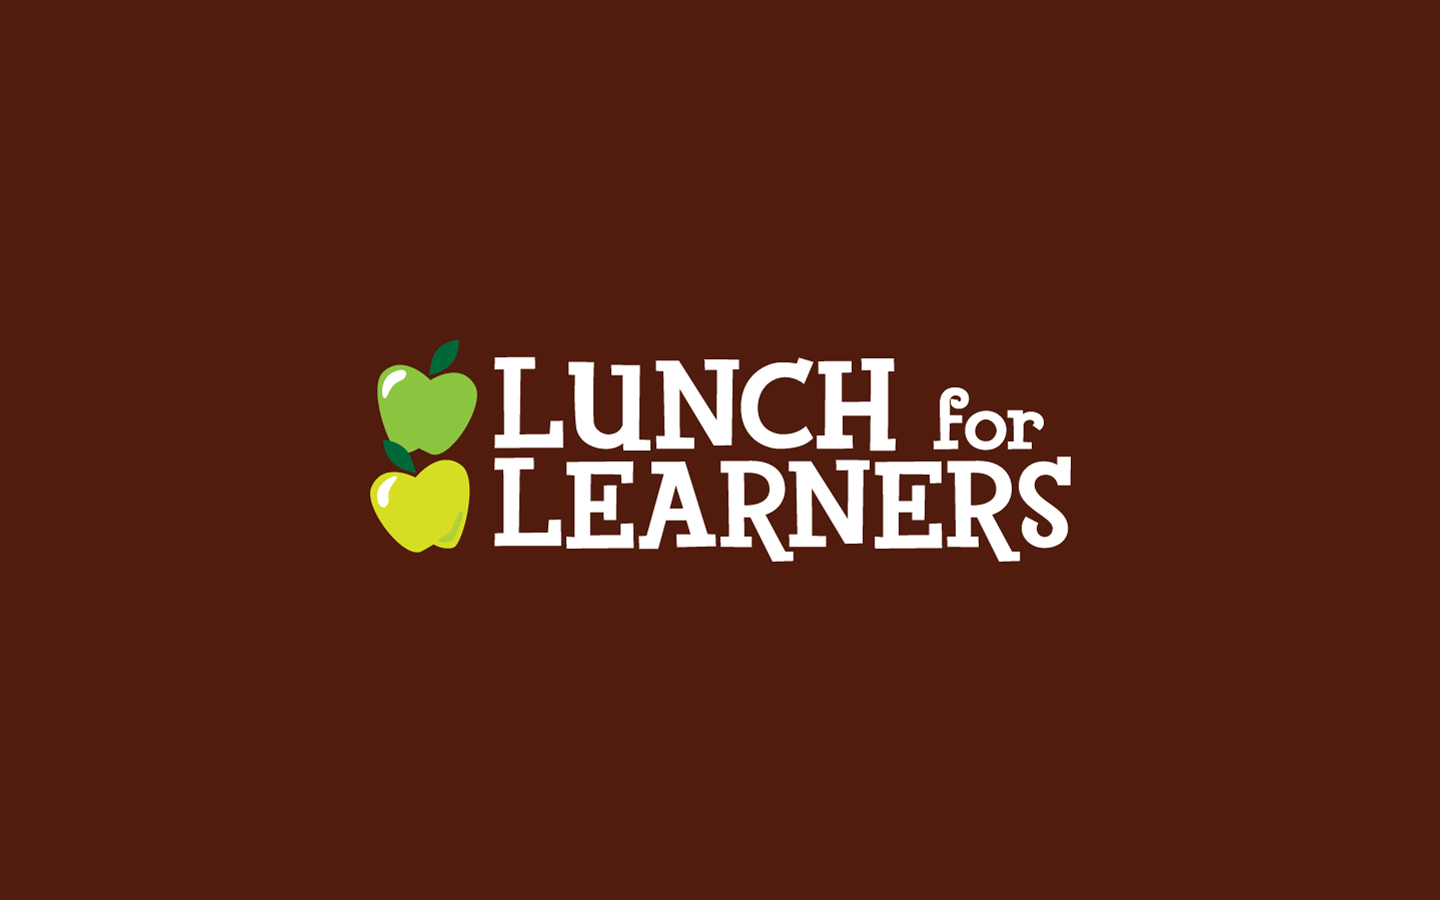 Lunch-for-Learners Logo